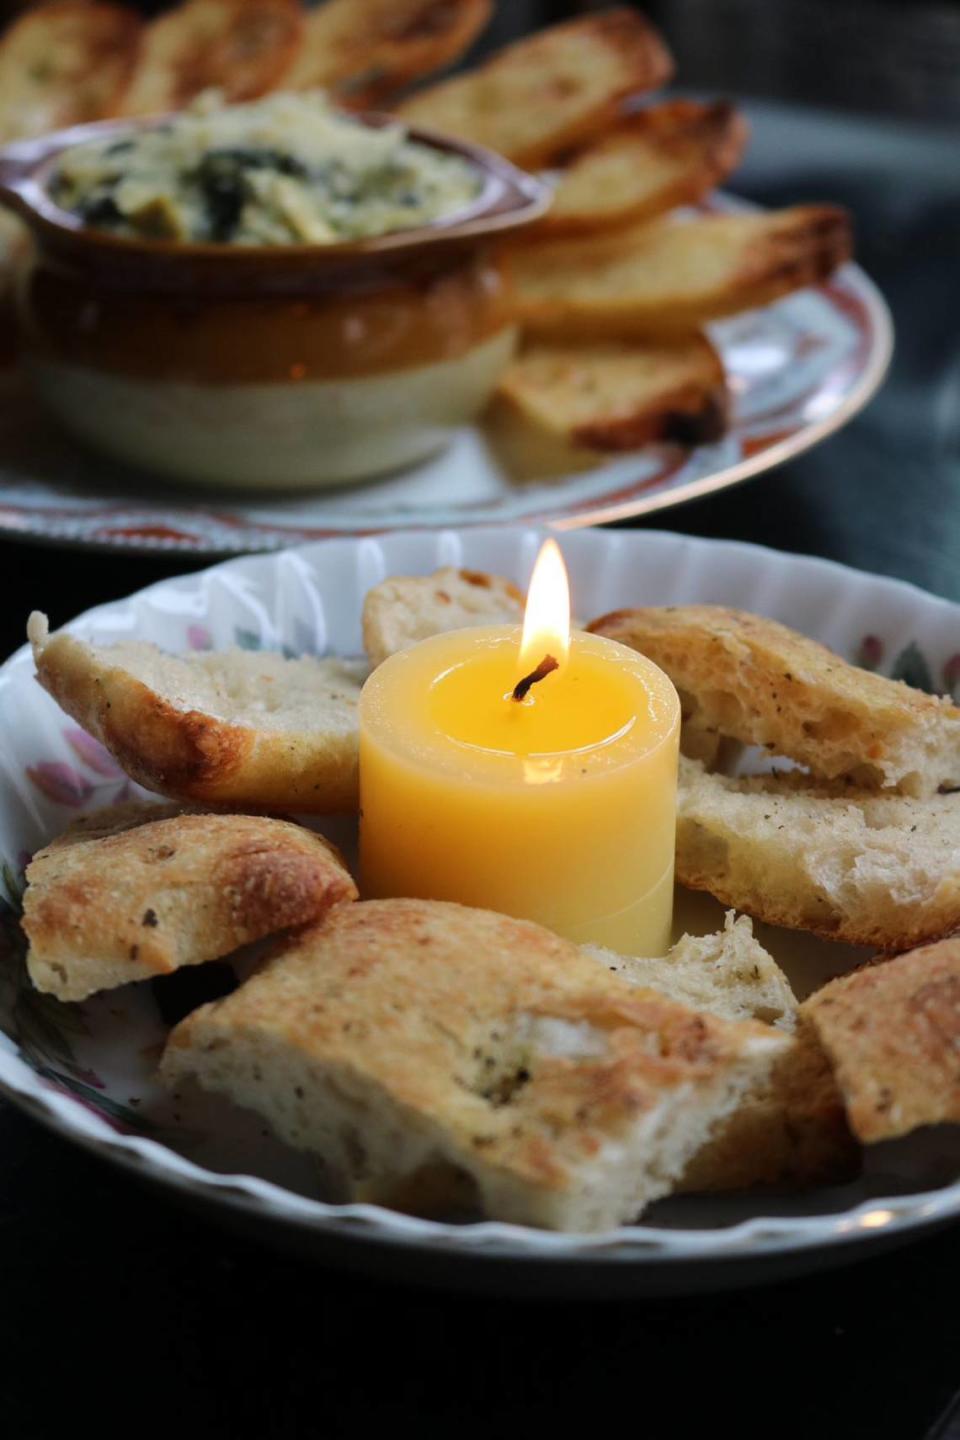 The butter candle with herbed focaccia from Billy Sunday.